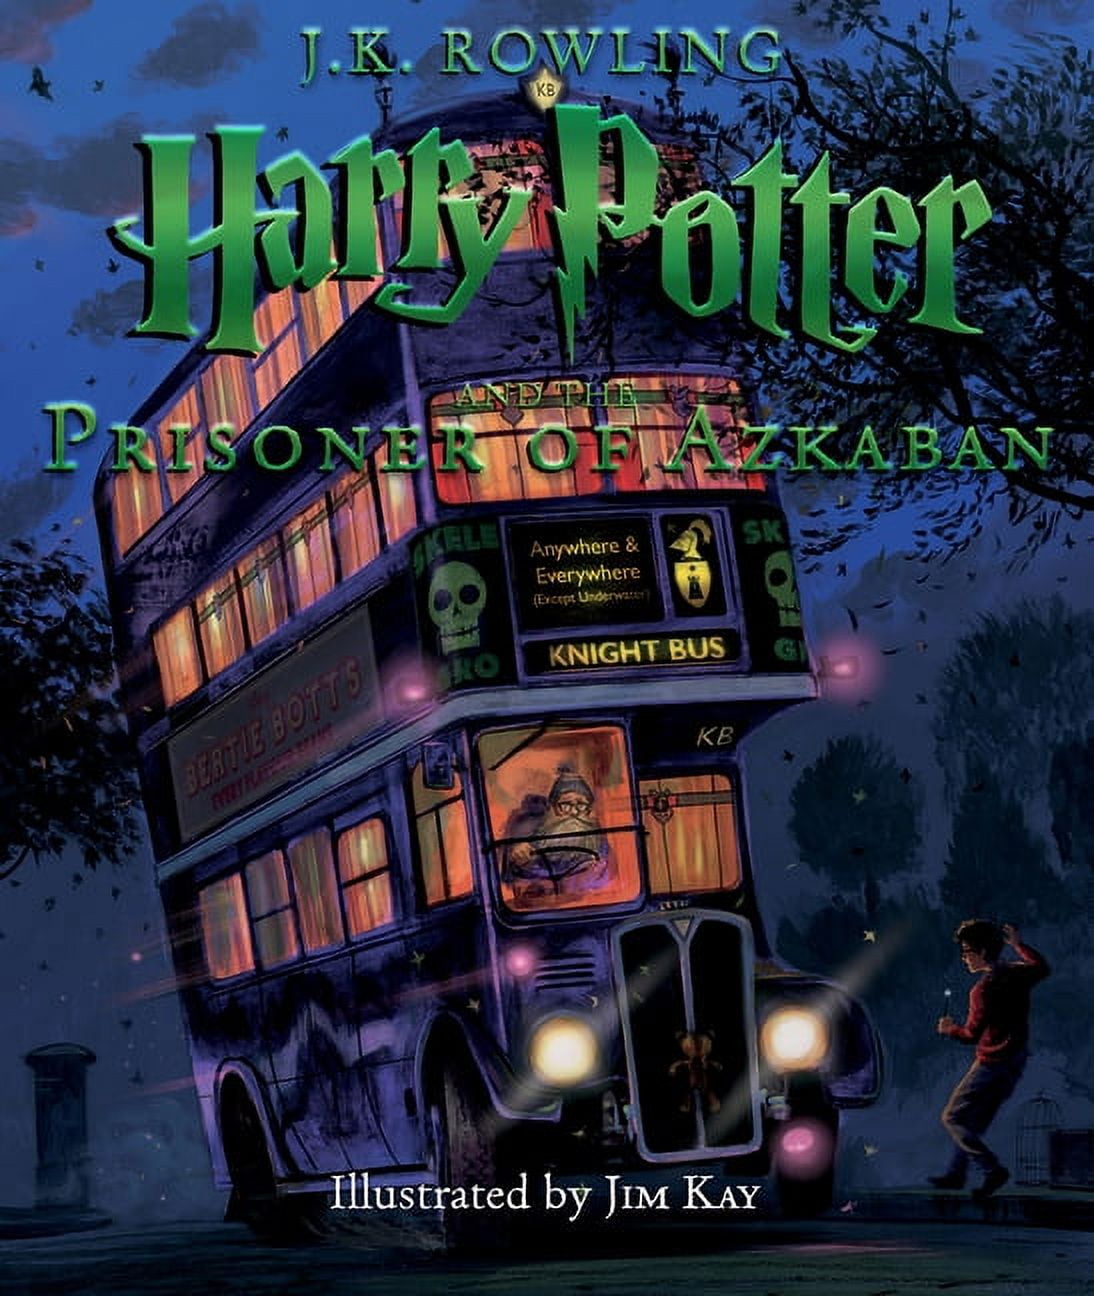 Harry Potter Illustrated 3 Books Set PAPERBACK (Harry Potter and The C